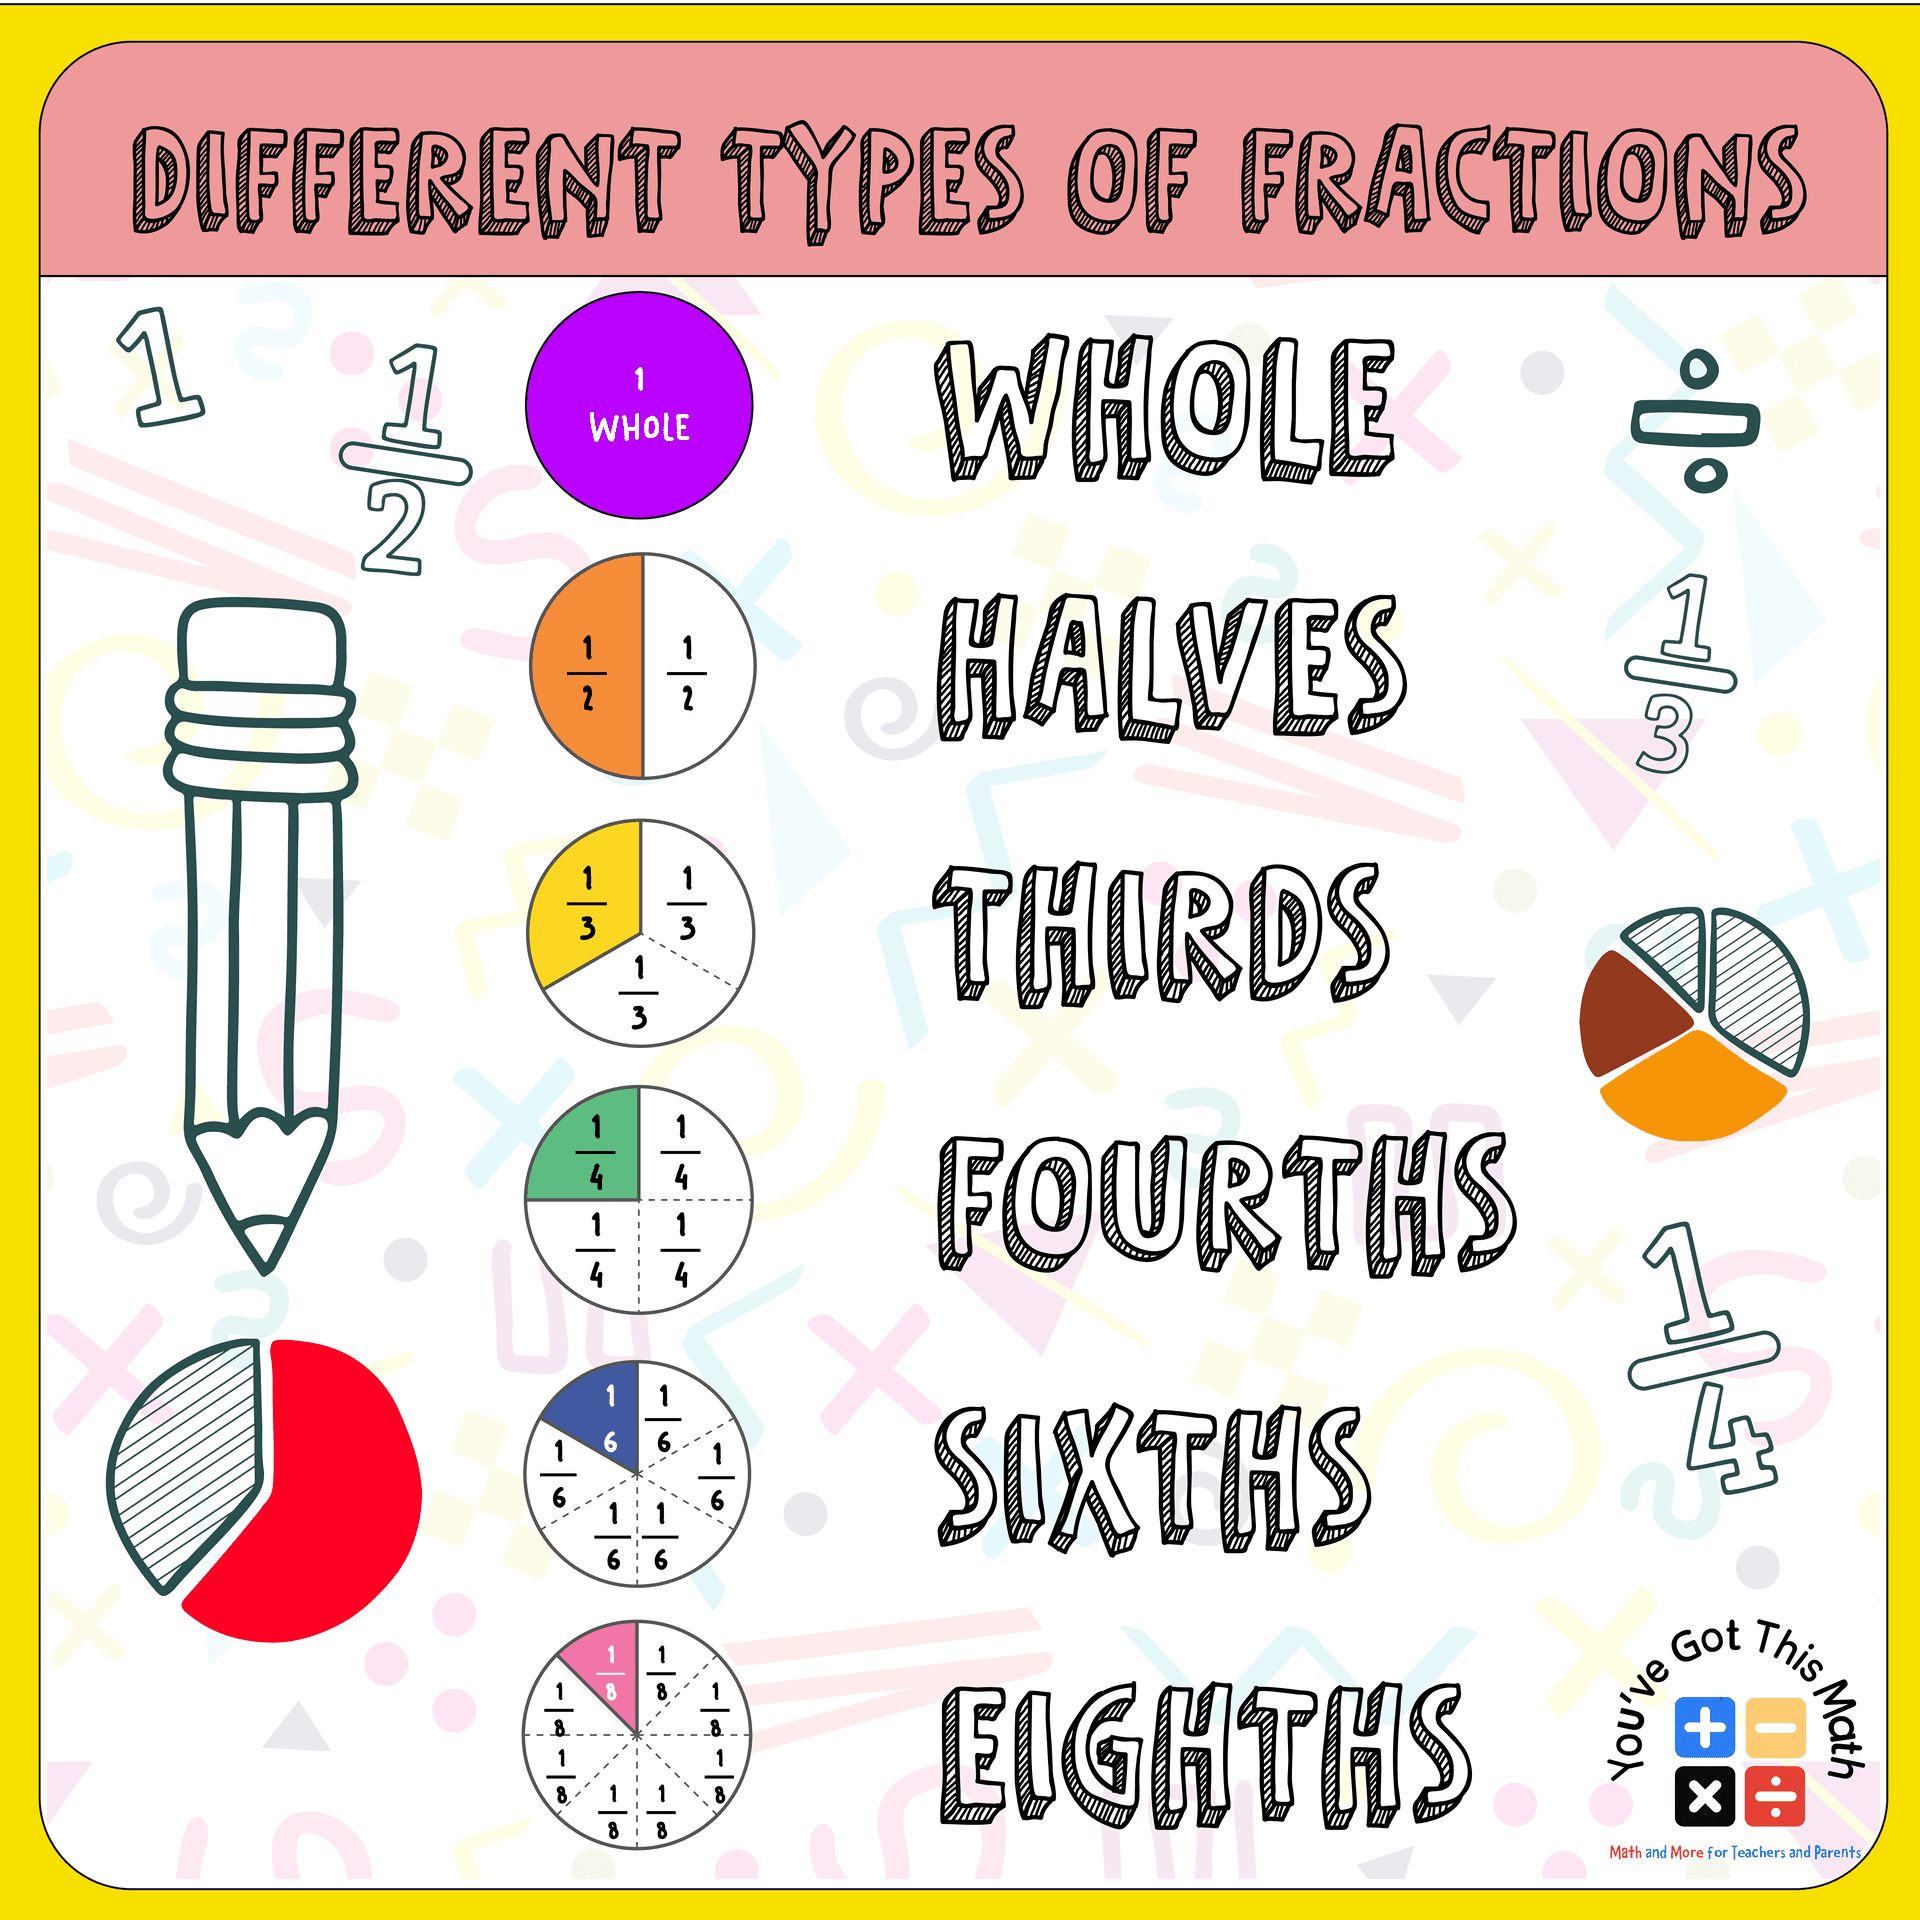 Different types of fractions